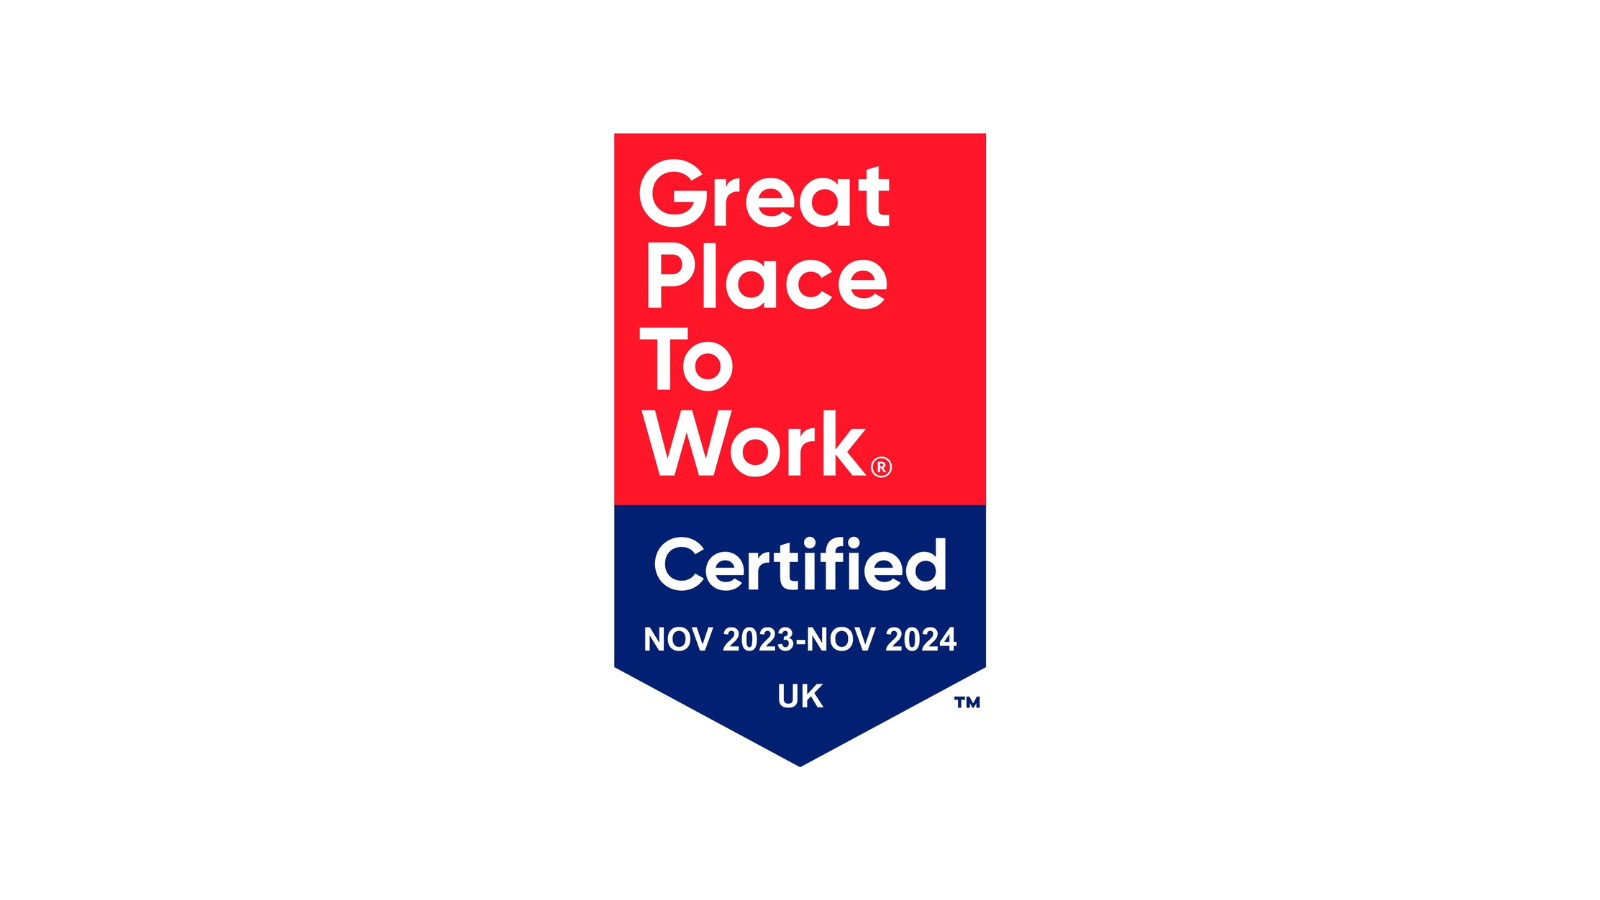 CSA Catapult certified as a Great Place to Work 2023 – 2024